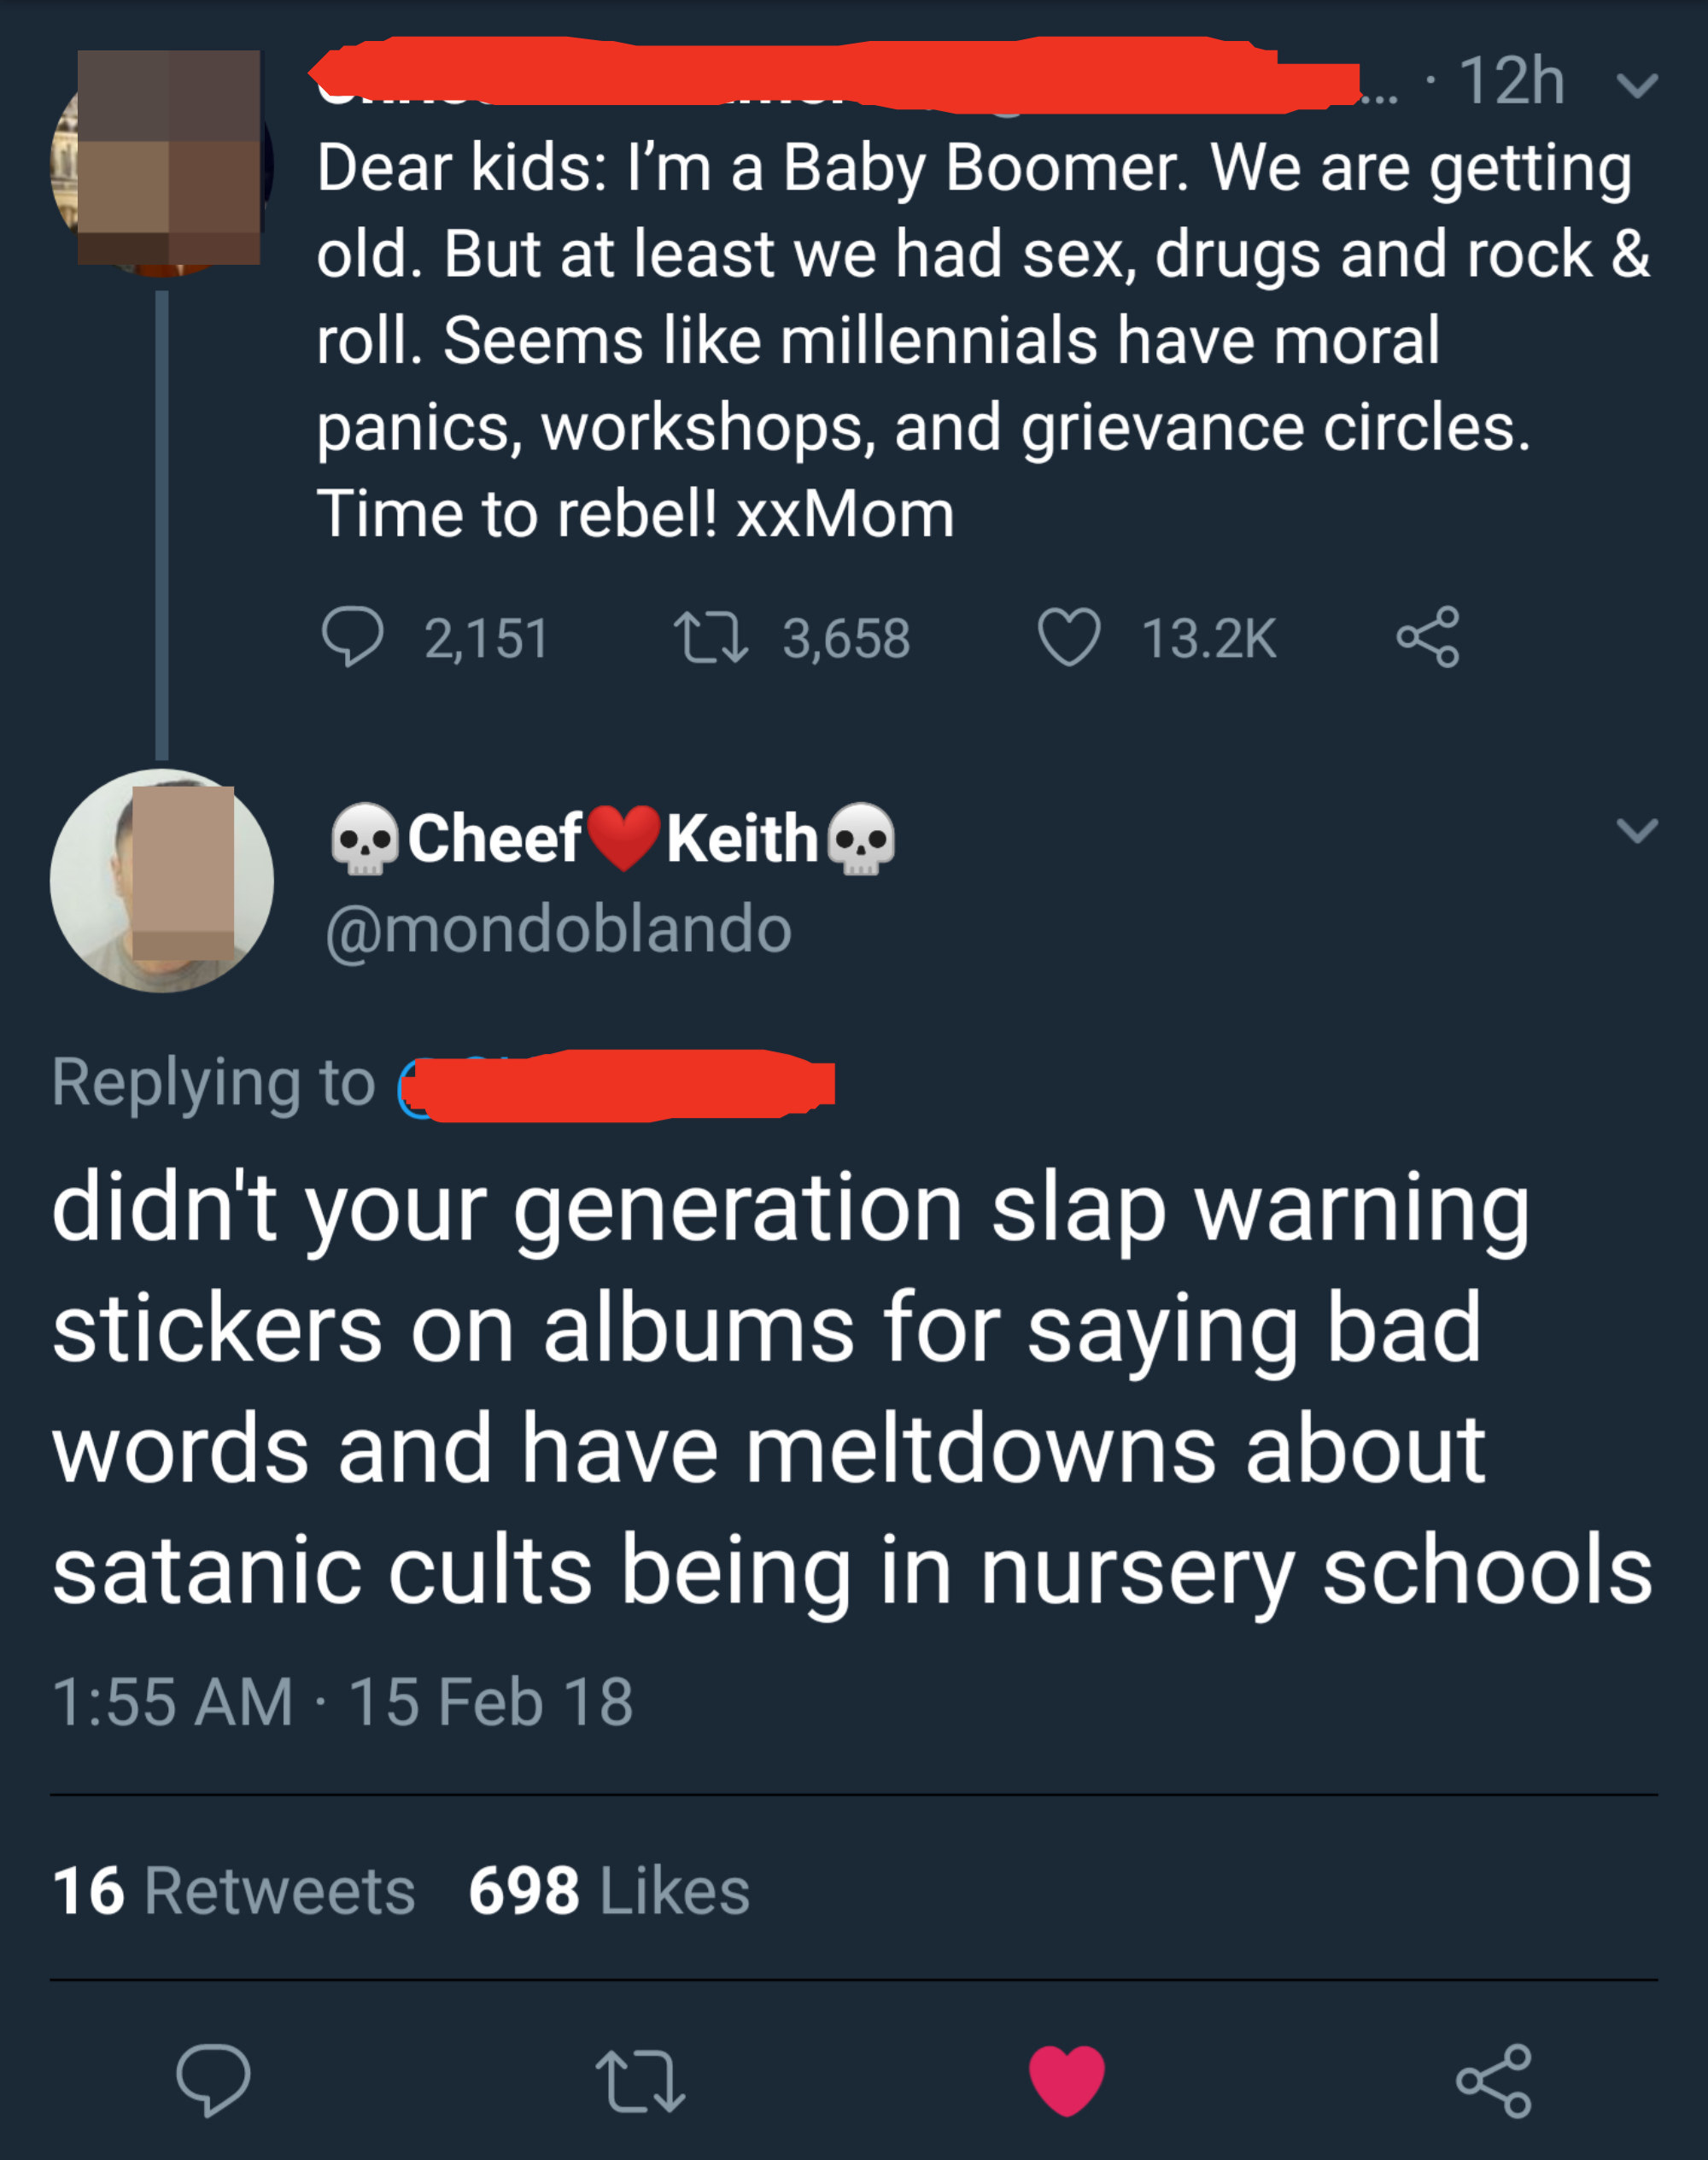 boomer tries to talk about sex drugs and rock but someone replies you are the generation that led to stickers on albums